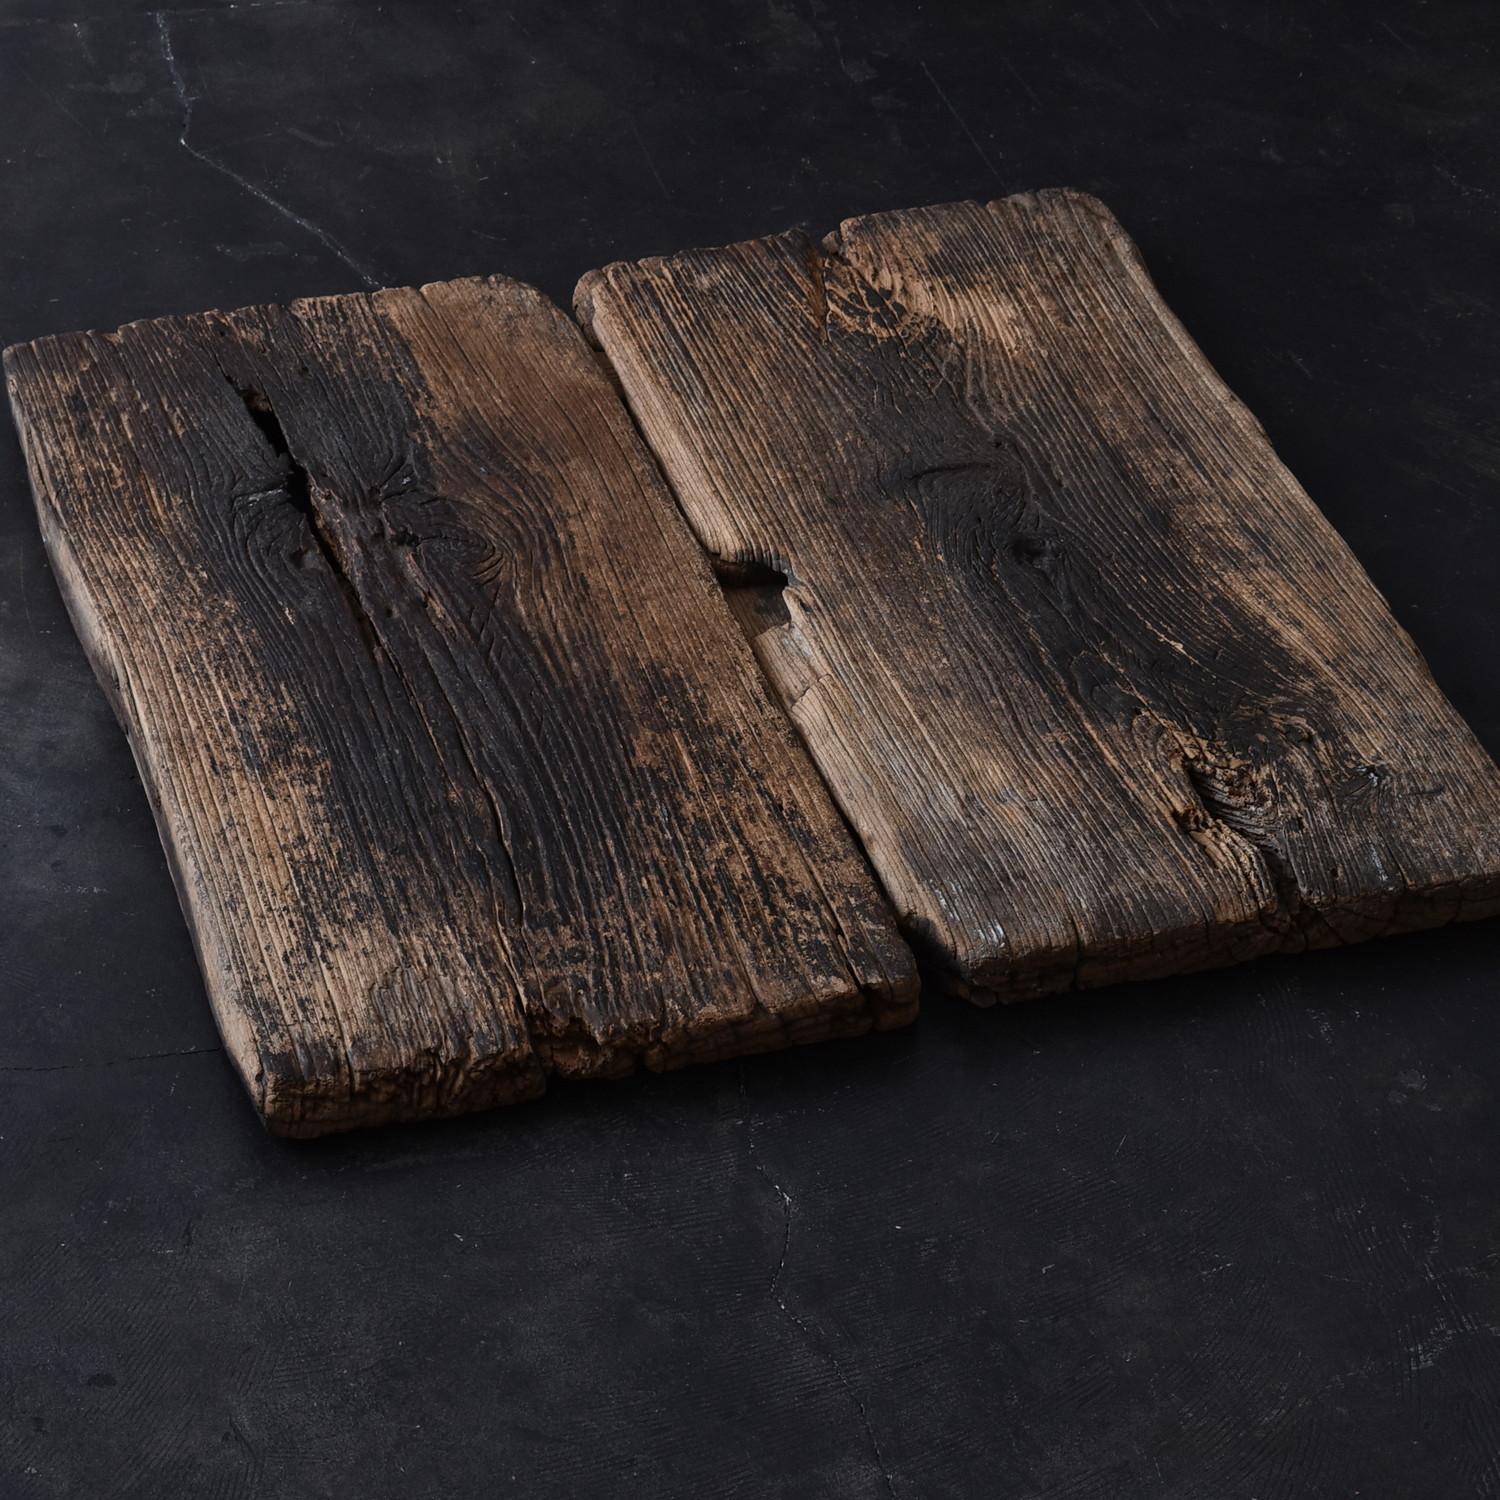 We Japanese introduce unique items with unique aesthetics, purchasing routes, and ways that no one can imitate.

As a Japanese, I have seen various old Japanese boards.
Among them, this has a special charm.
I think it was a board used by farmers in